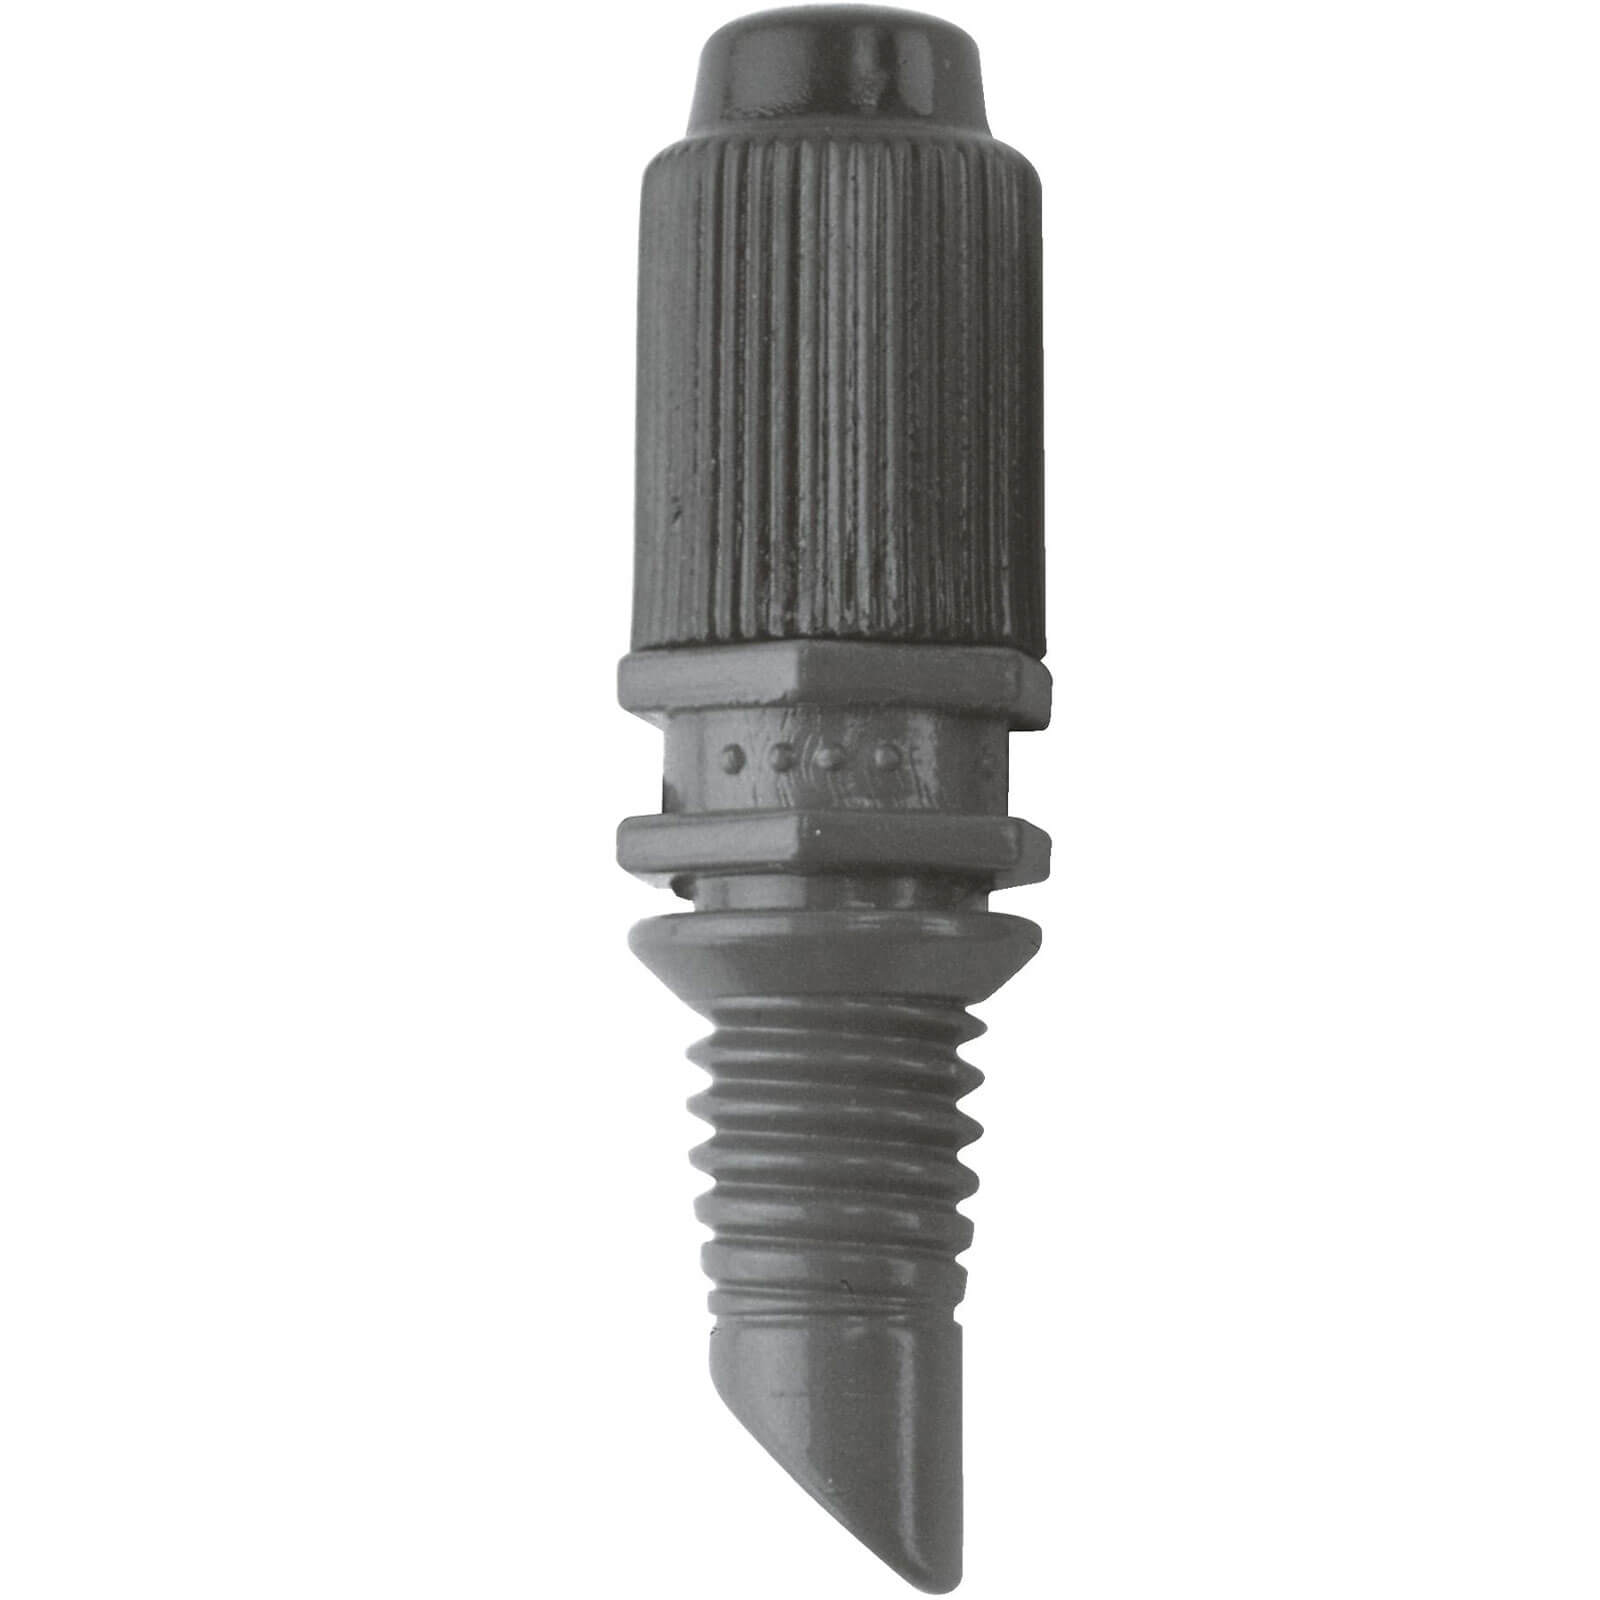 Image of Gardena MICRO DRIP 90° Spray Nozzle 3/16" / 4.6mm Pack of 5